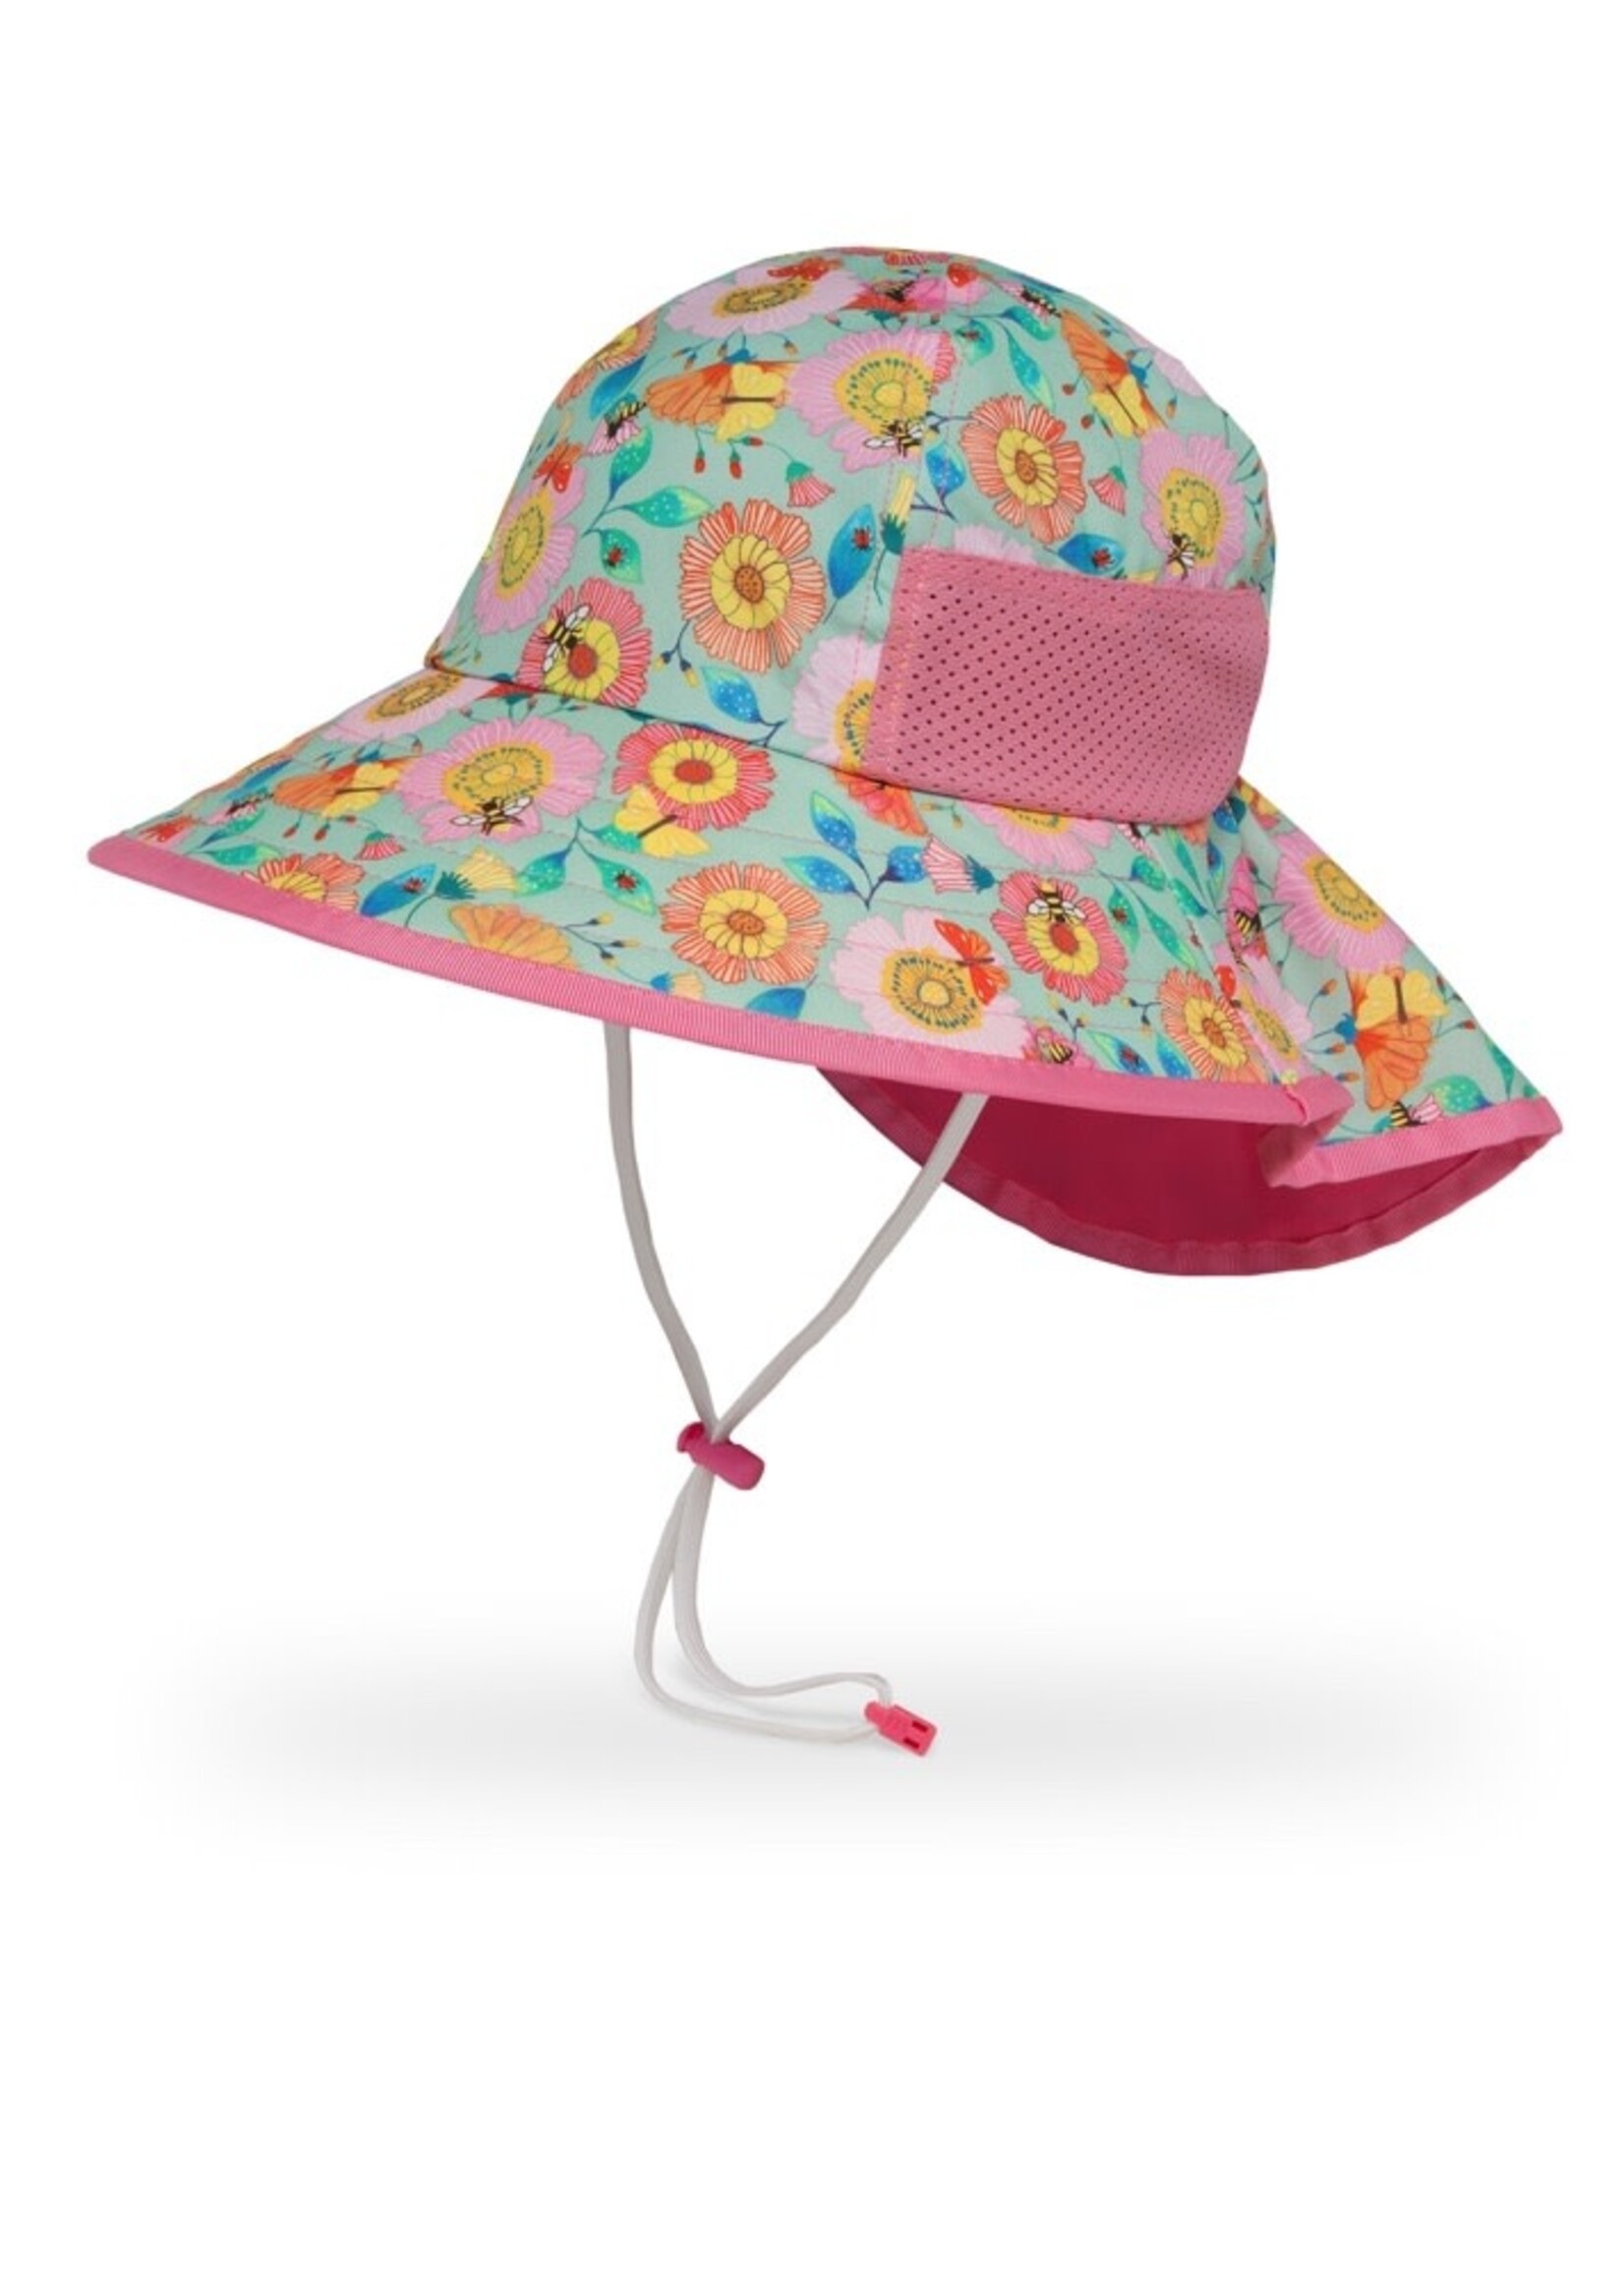 Sunday Afternoon Sunday Afternoons, Kid’s Play Hat for Girls